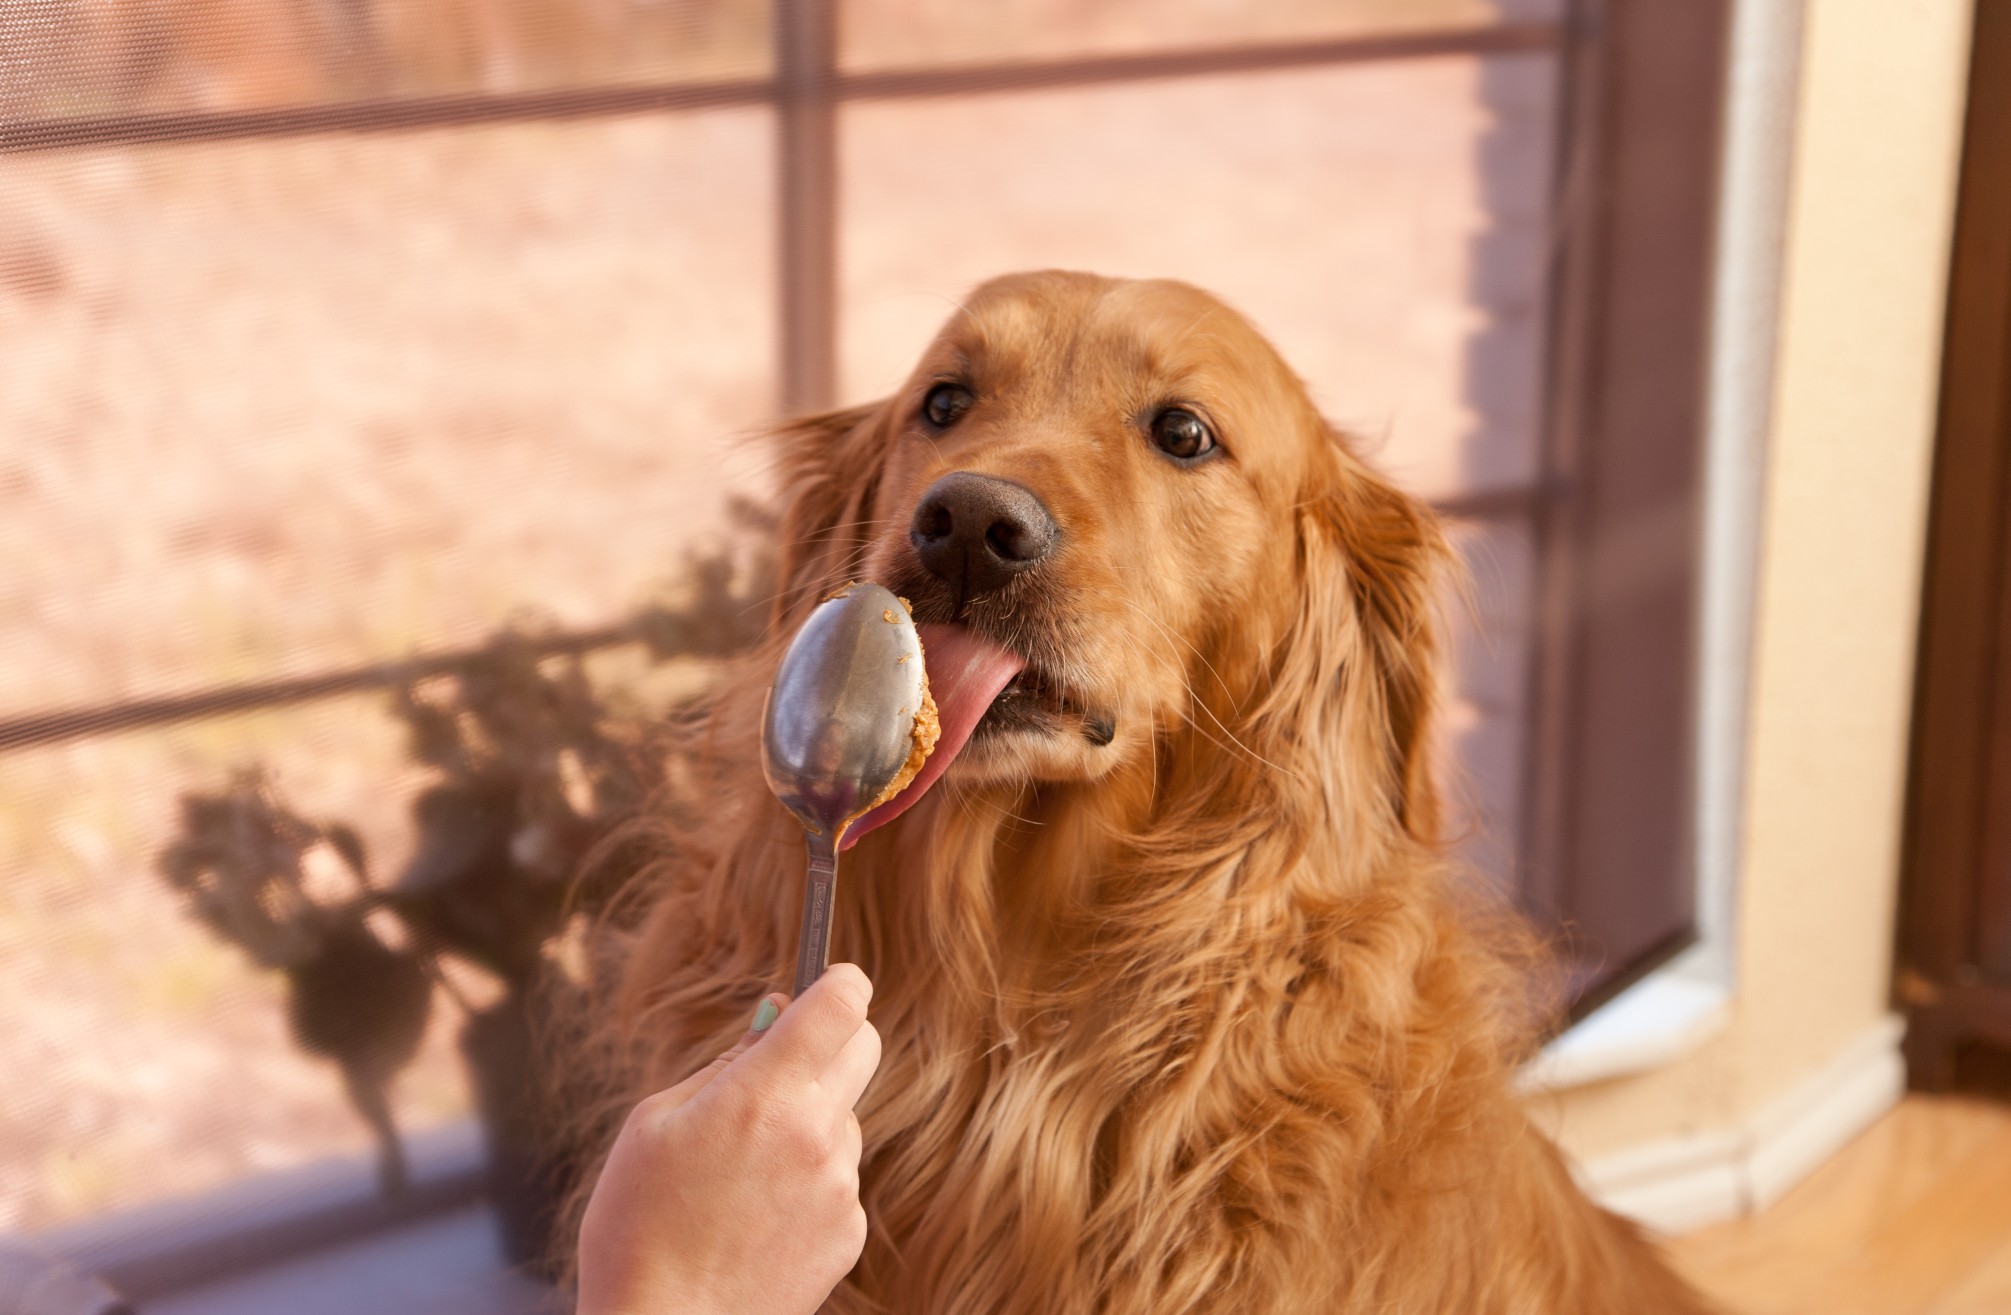 Xylitol and the Dangers of Peanut Butter For Pets